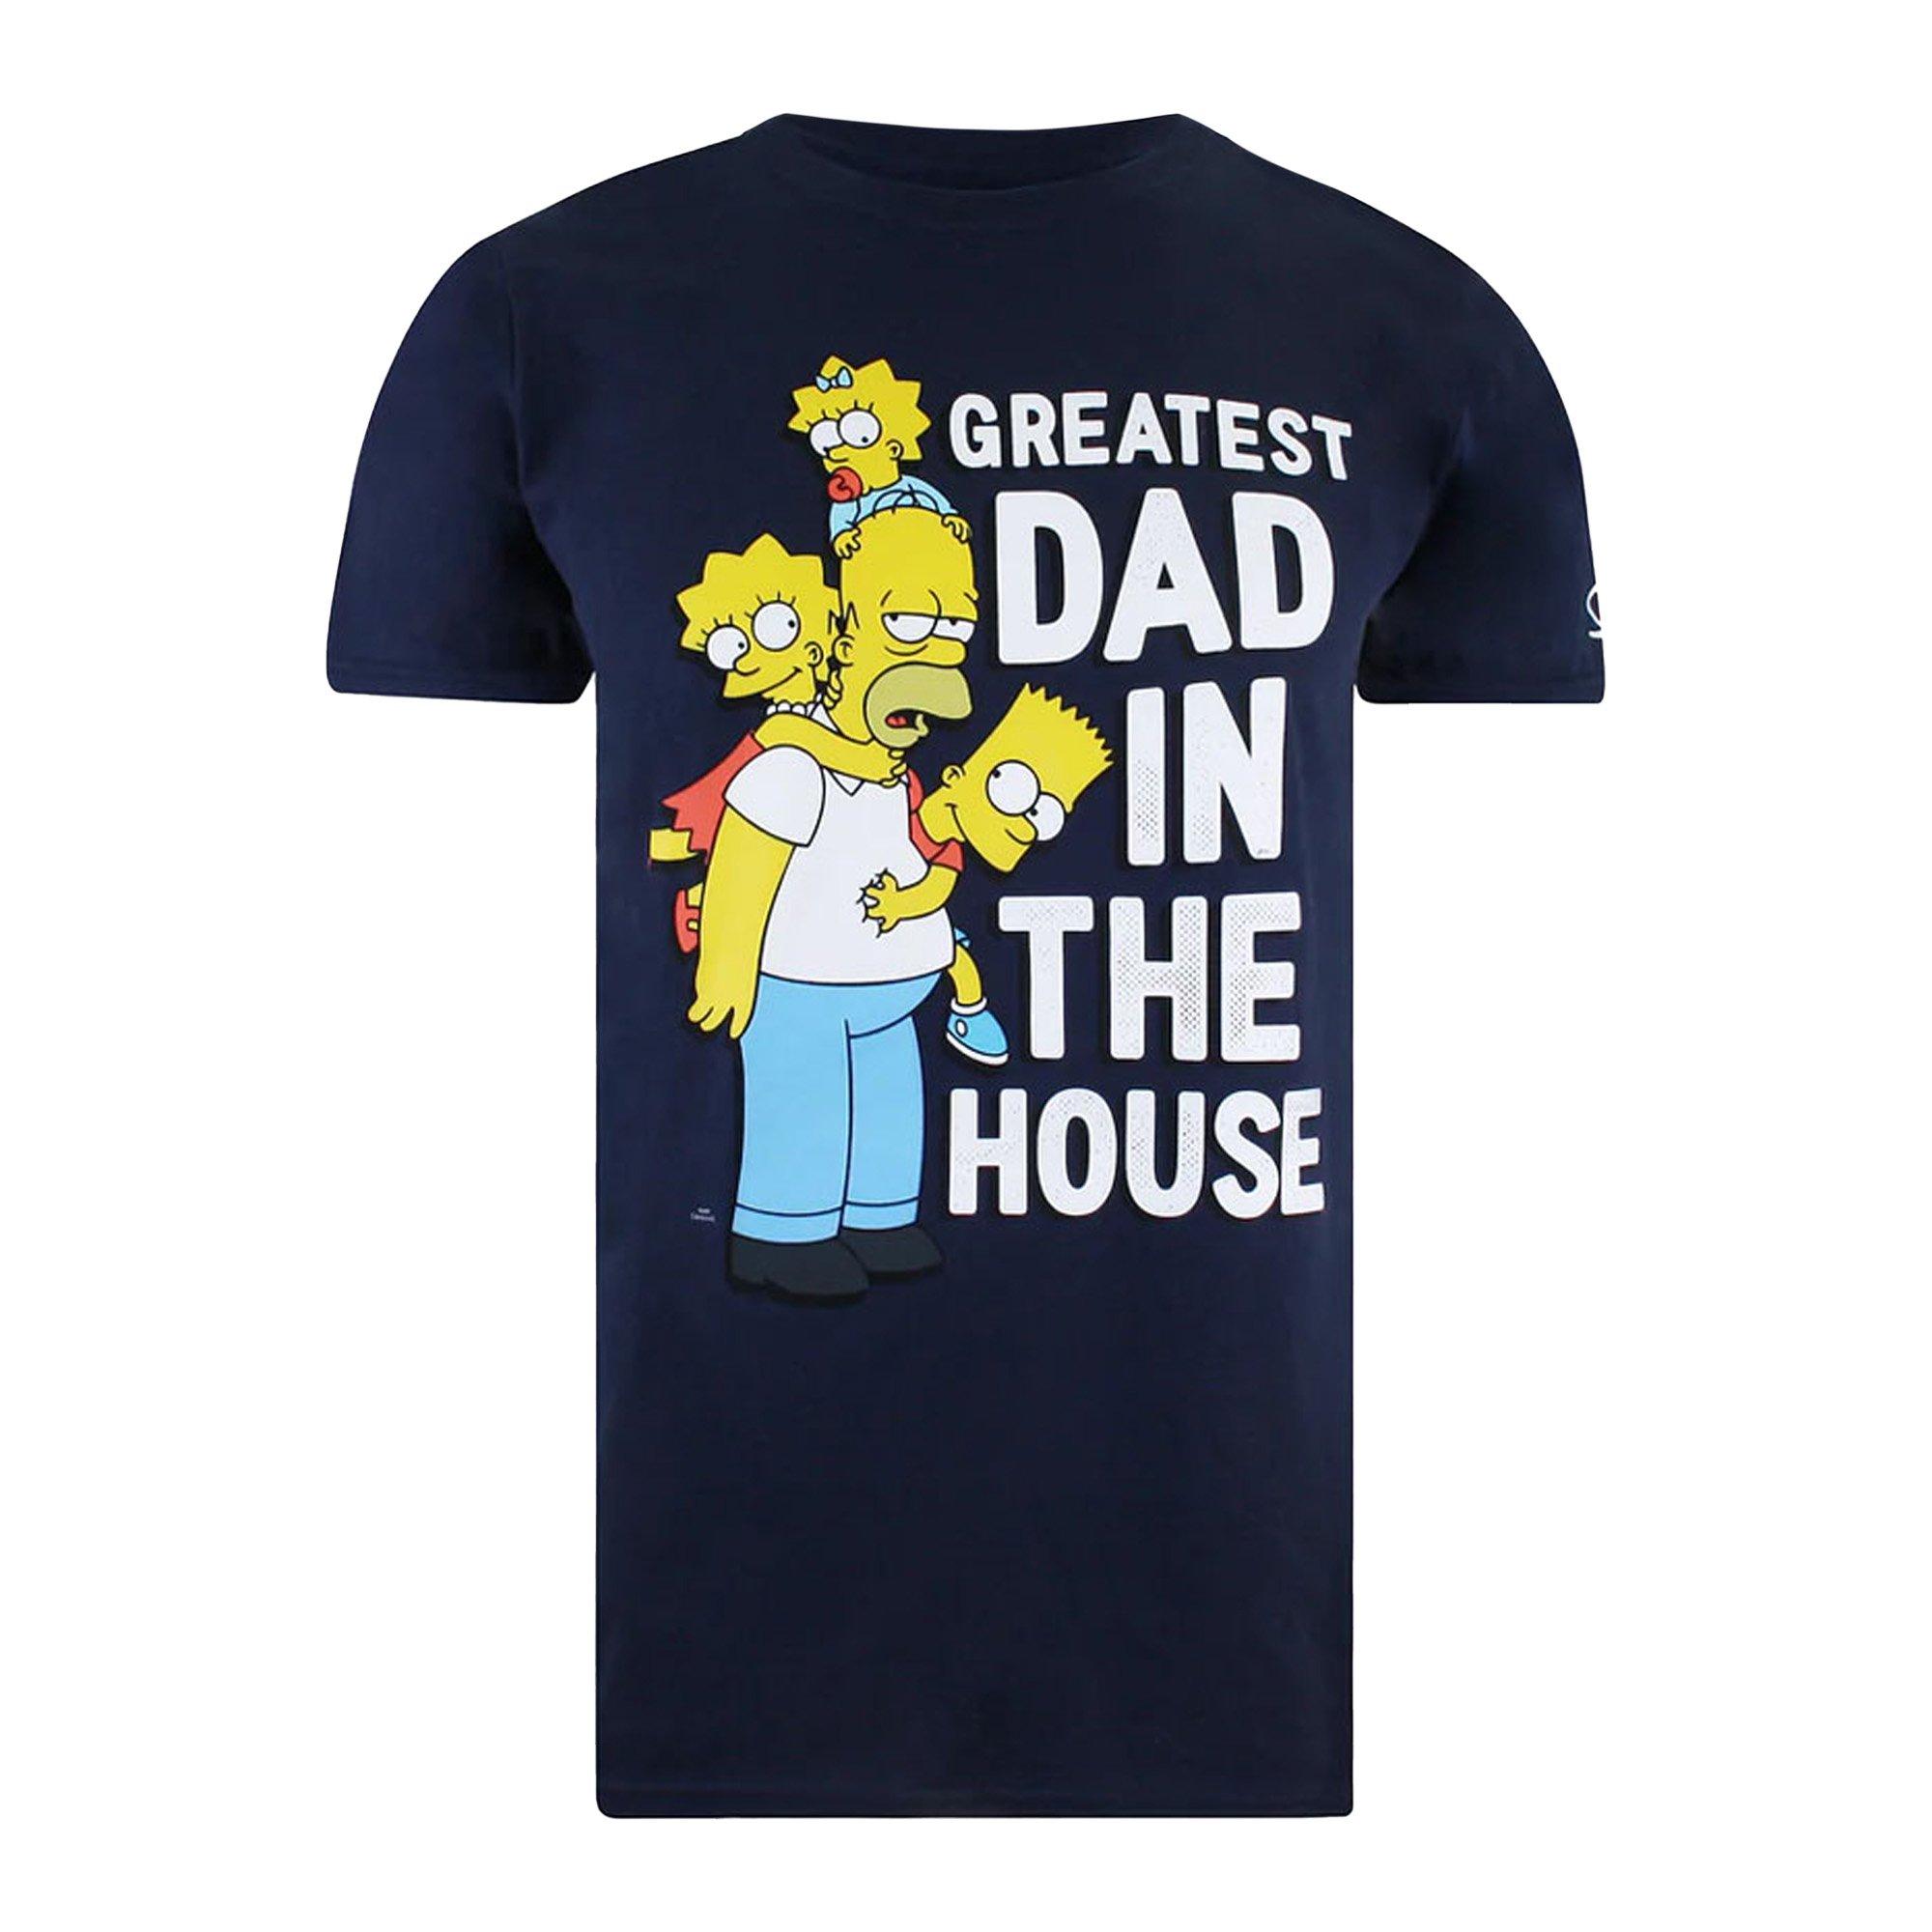 The Simpsons  Tshirt GREATEST DAD IN THE HOUSE 